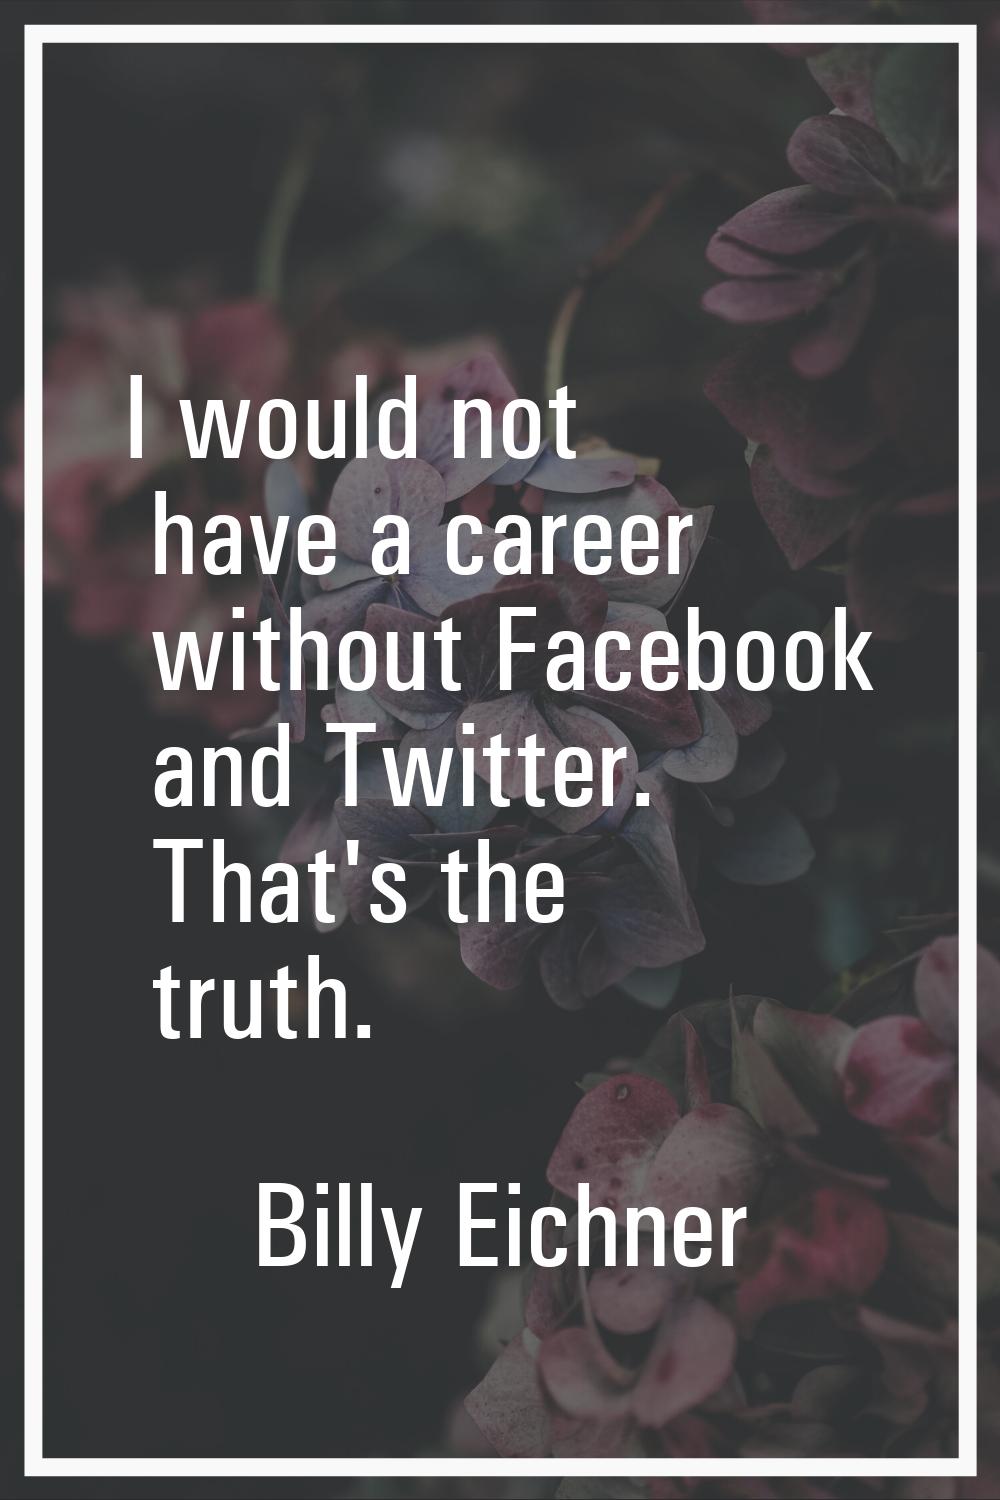 I would not have a career without Facebook and Twitter. That's the truth.